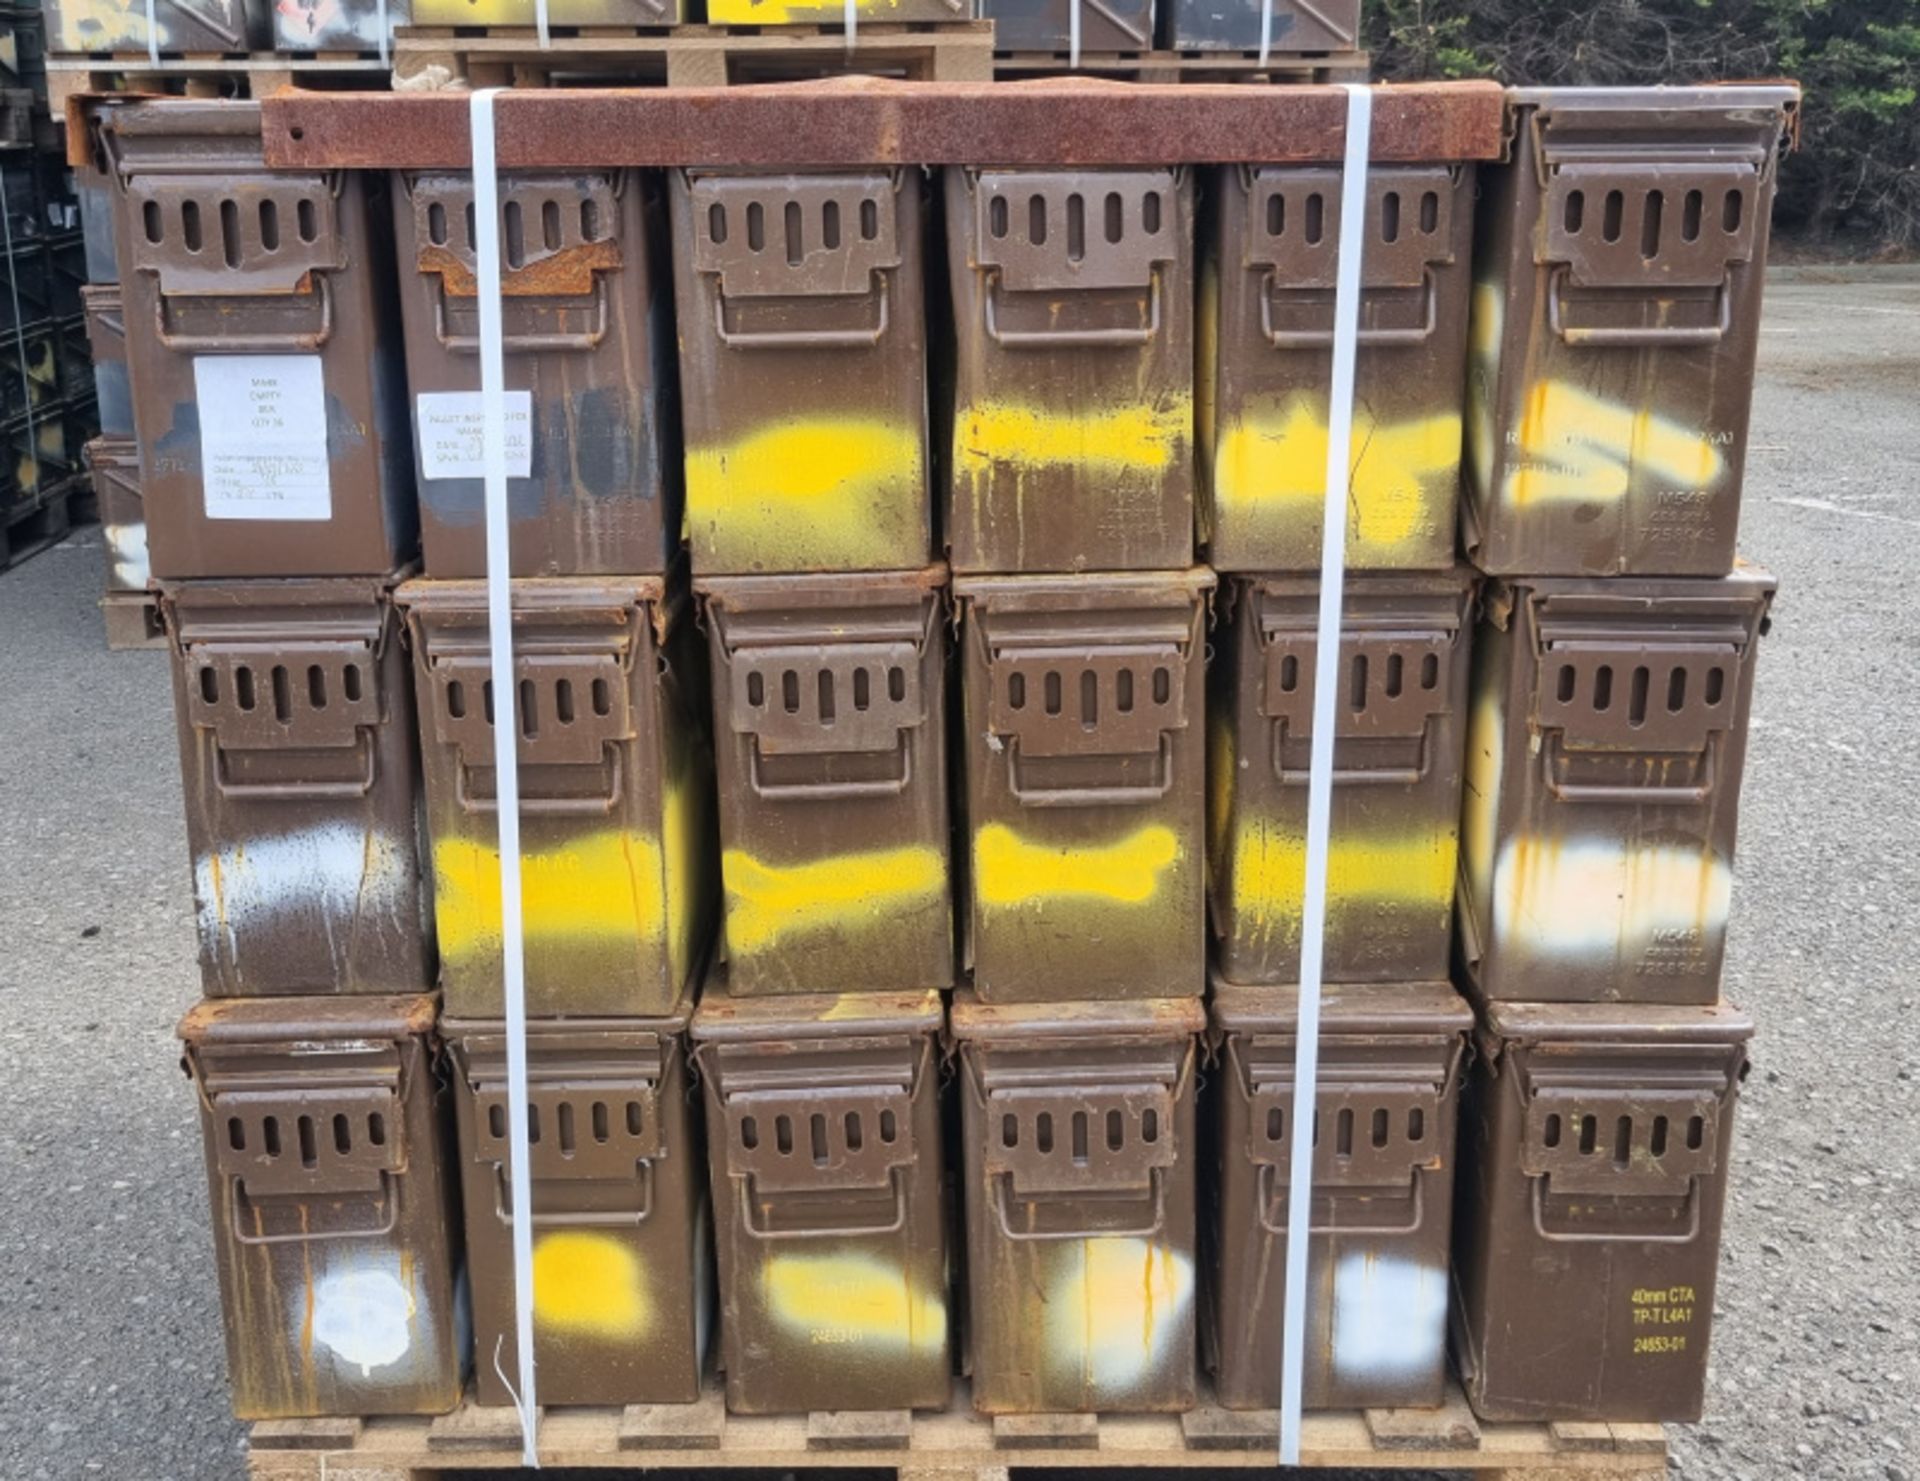 1x Pallet of M548 ammo containers - total quantity 36